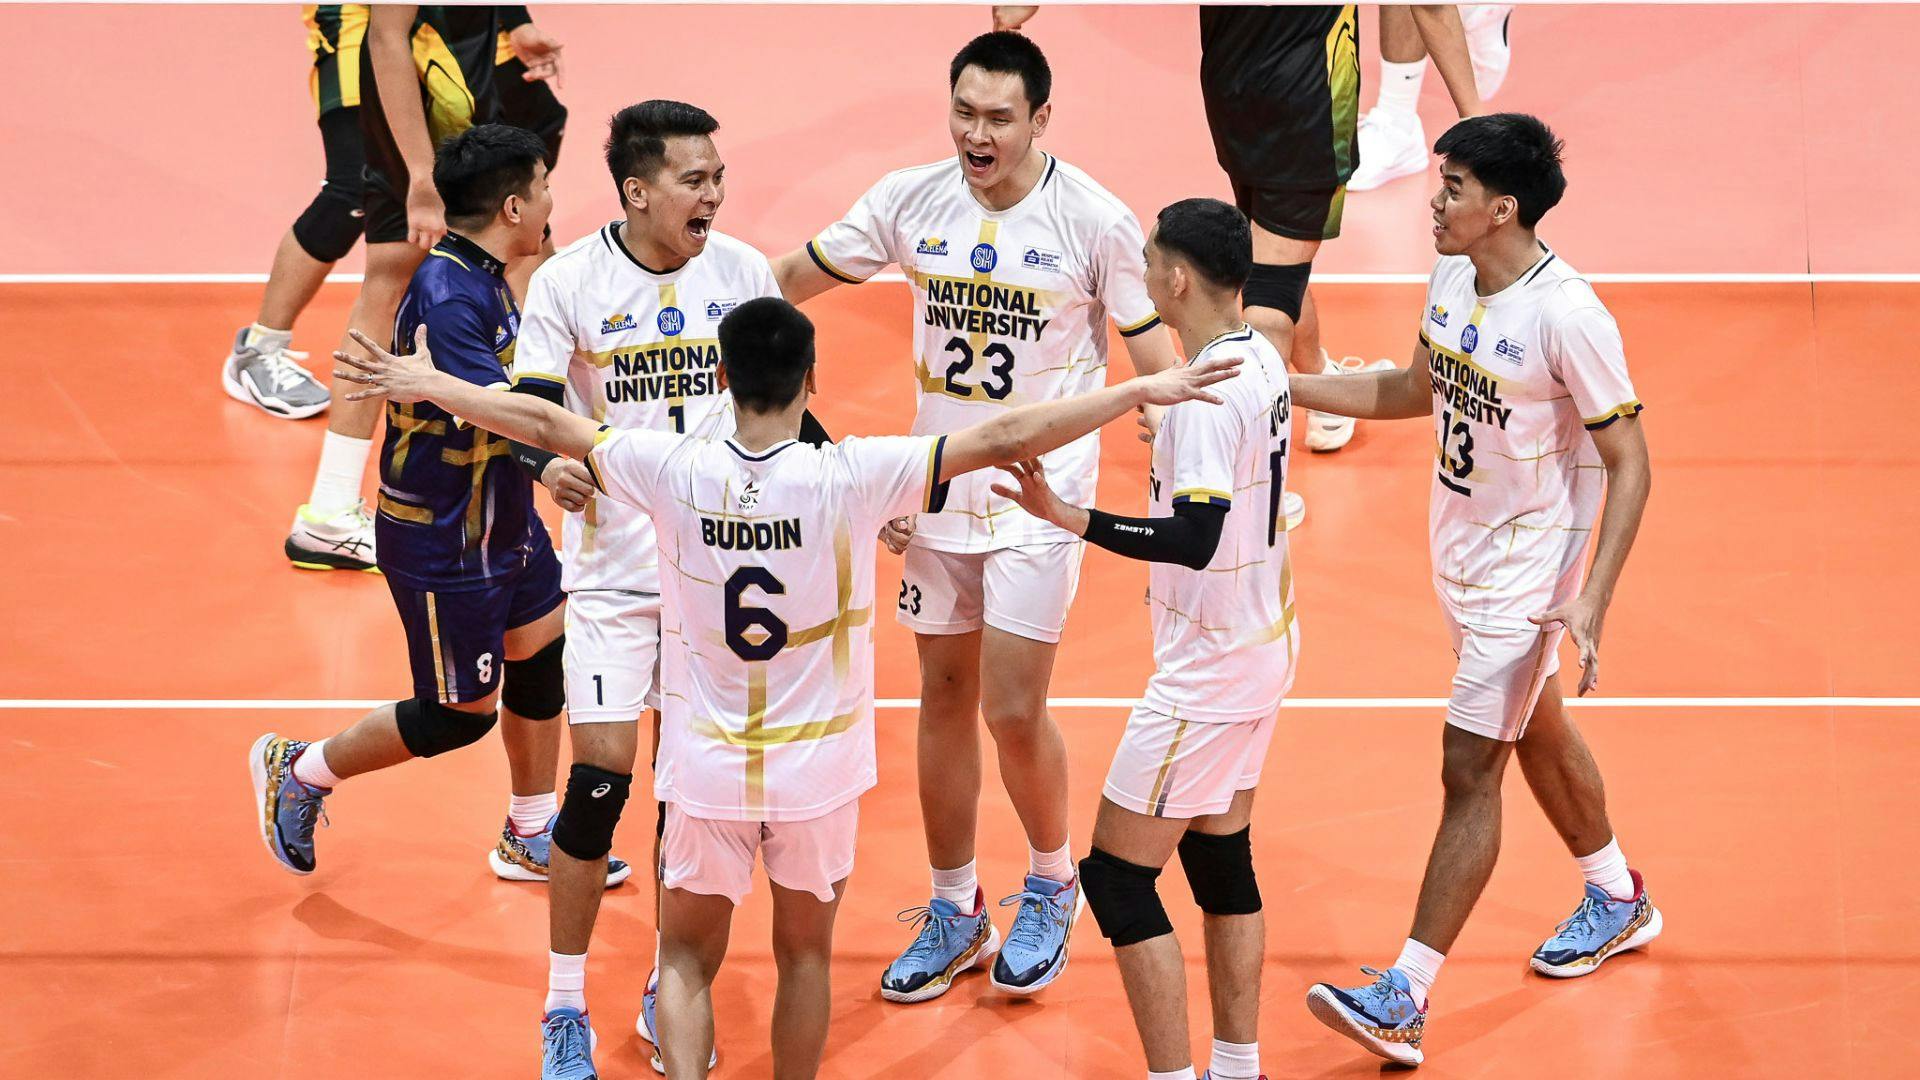 UAAP: NU gains solo second after FEU rout, Ateneo sweeps Adamson to end season on high note